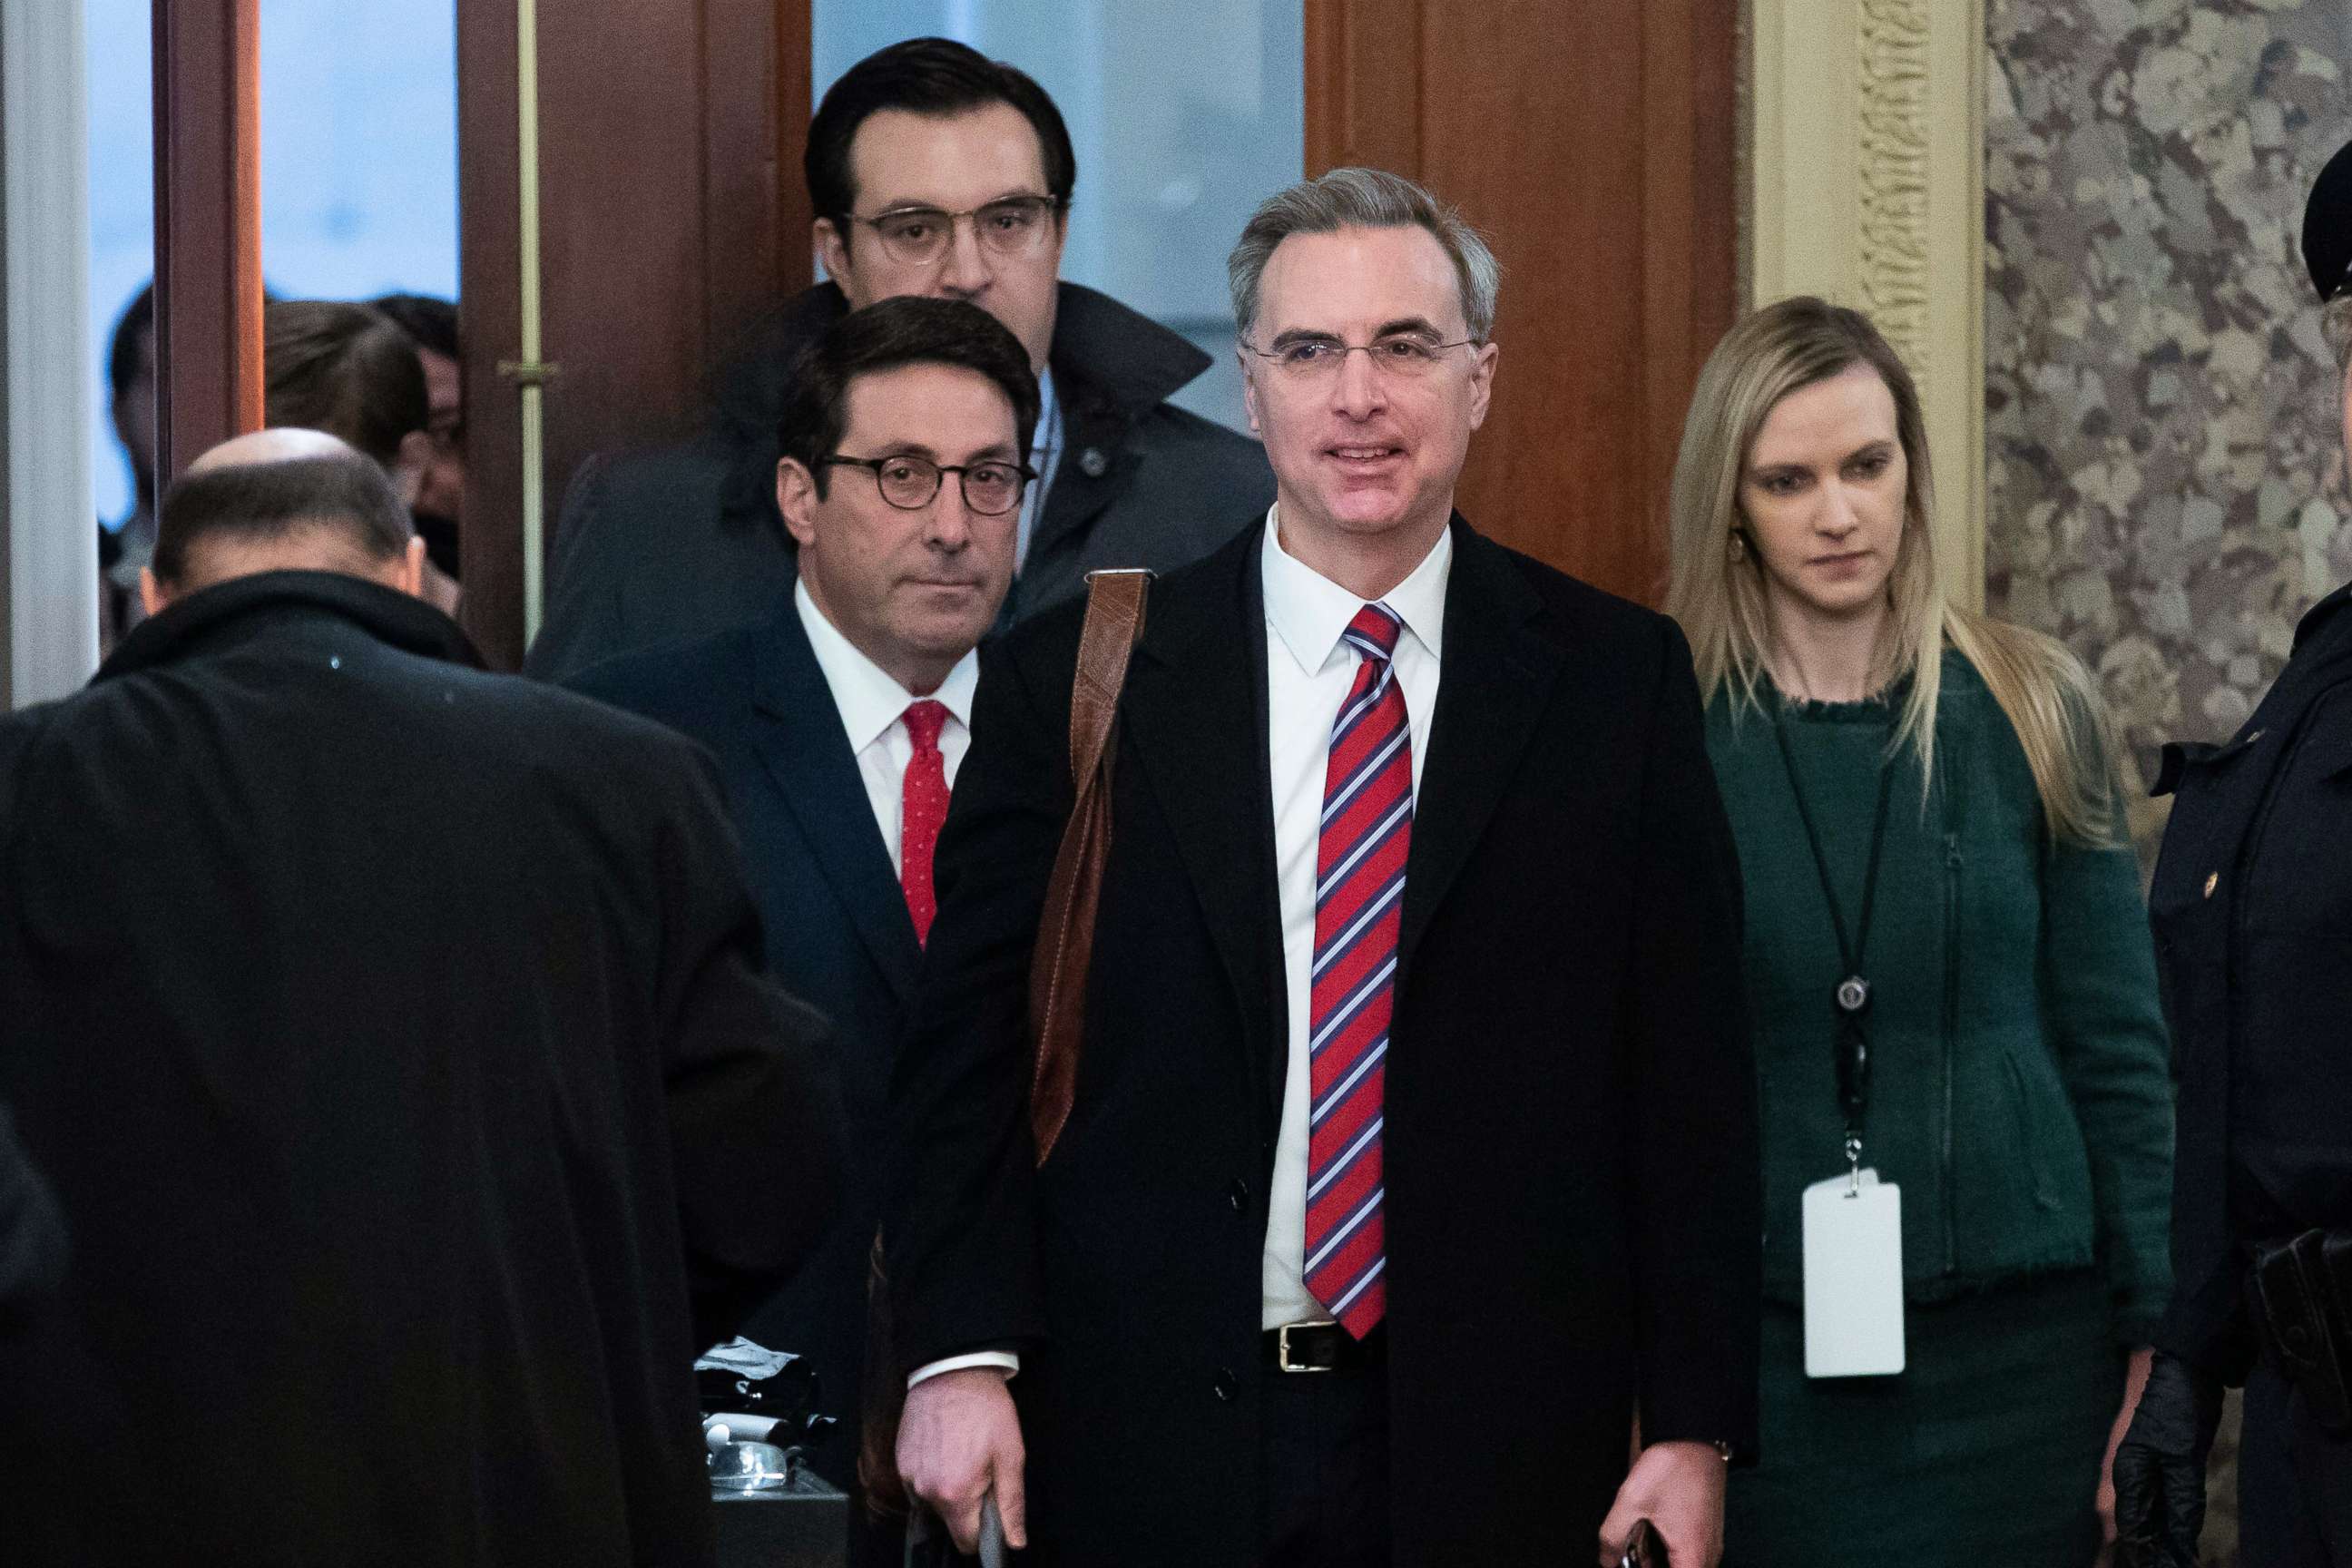 PHOTO: President Donald J. Trump's defense team members Jay Sekulow, left, Jordan Sekulow, back left,and White House Counsel Pat Cipollone, center arrive for the Senate impeachment trial at the U.S. Capitol, in Washington on Jan. 25, 2020.